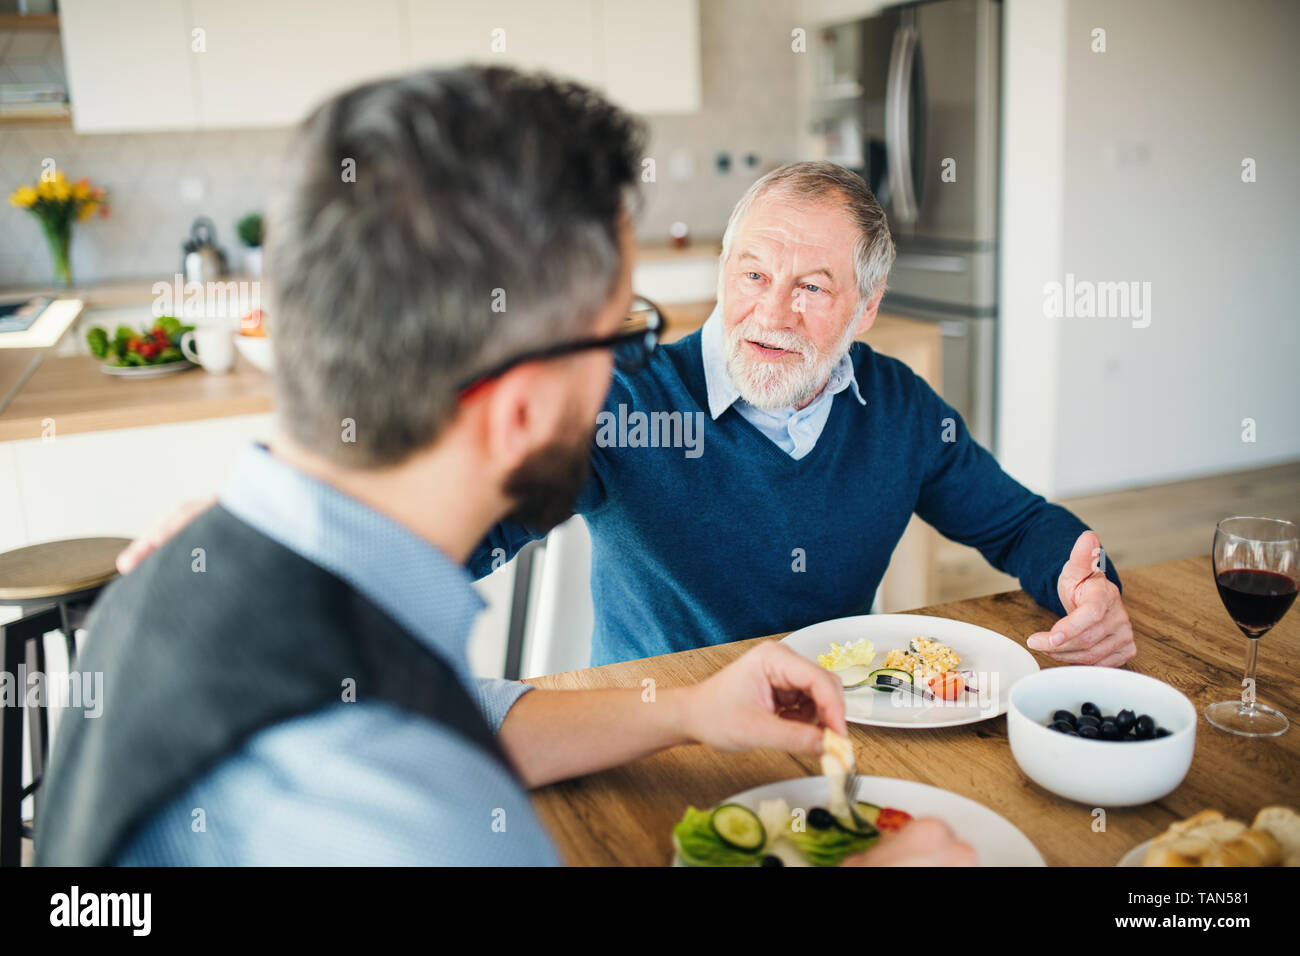 An adult hipster son and senior father indoors at home, eating light lunch. Stock Photo